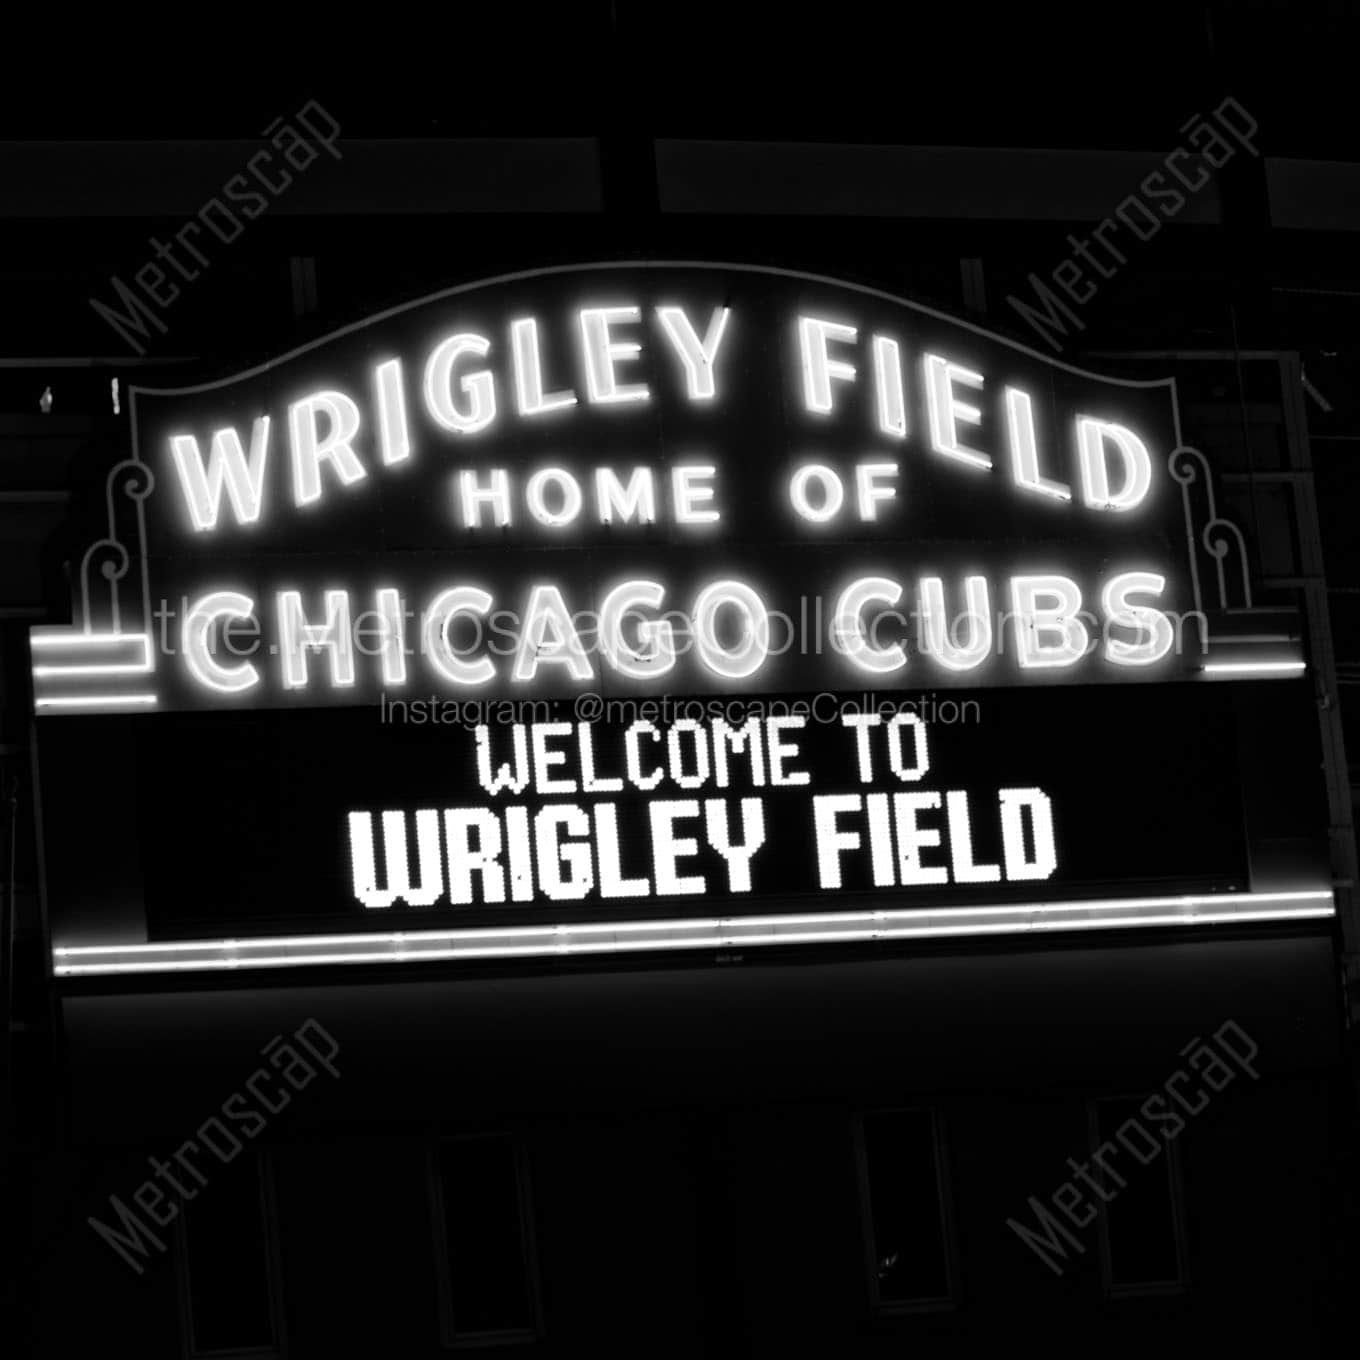 wrigley field home of chicago cubs Black & White Office Art